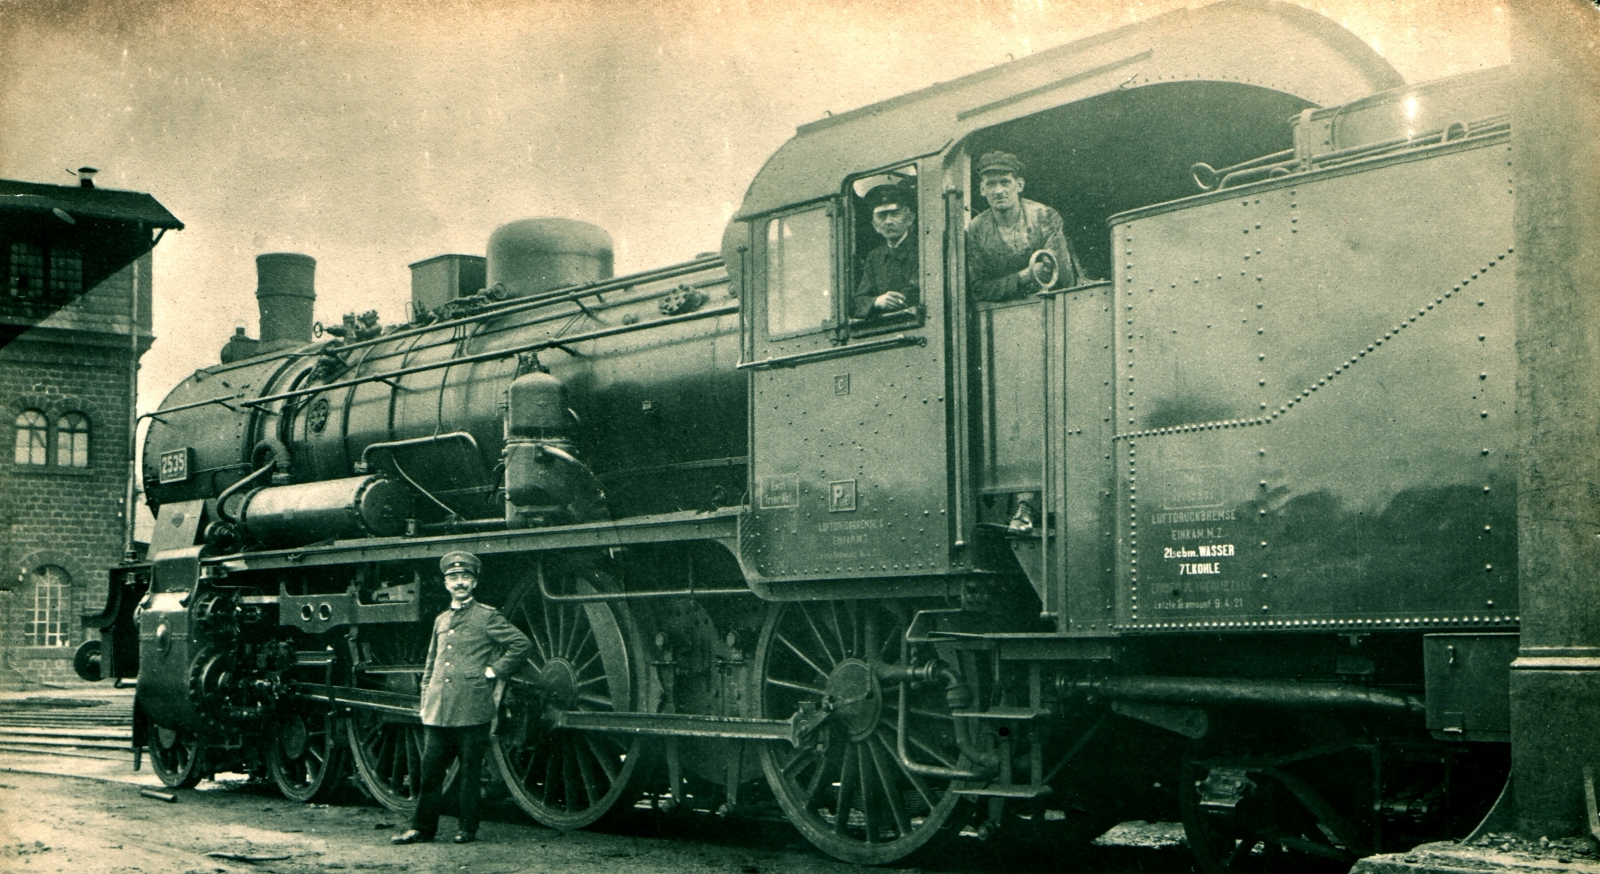 In August 1921, the crew of road number 2535 in the Trier depot poses together with their locomotive